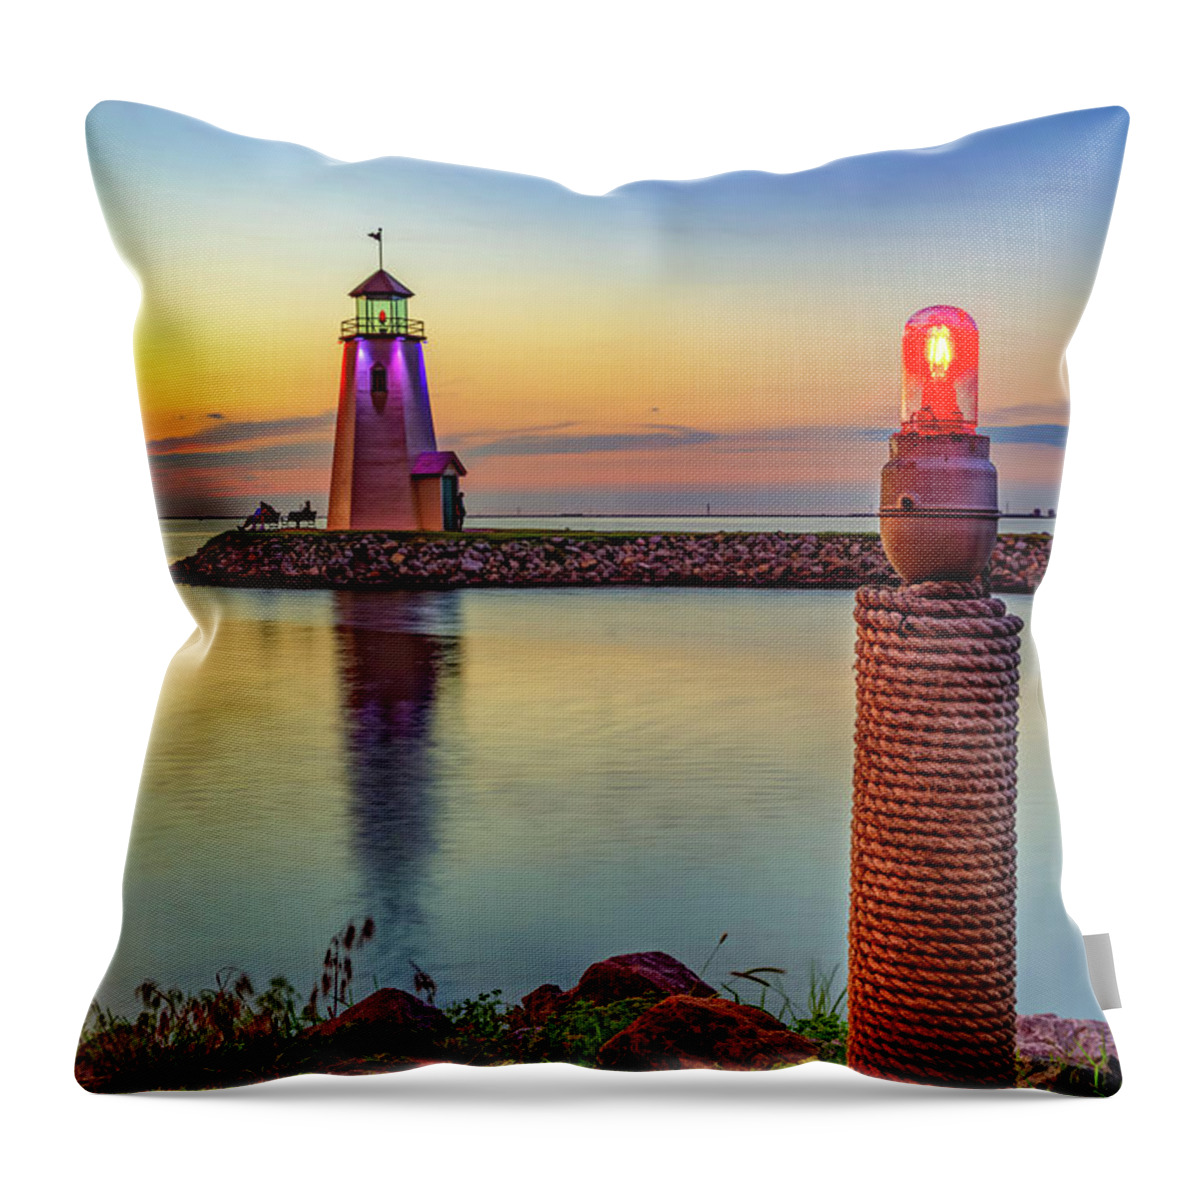 Oklahoma City Throw Pillow featuring the photograph Sunset At The Lake Hefner Lighthouse in Oklahoma City by Gregory Ballos